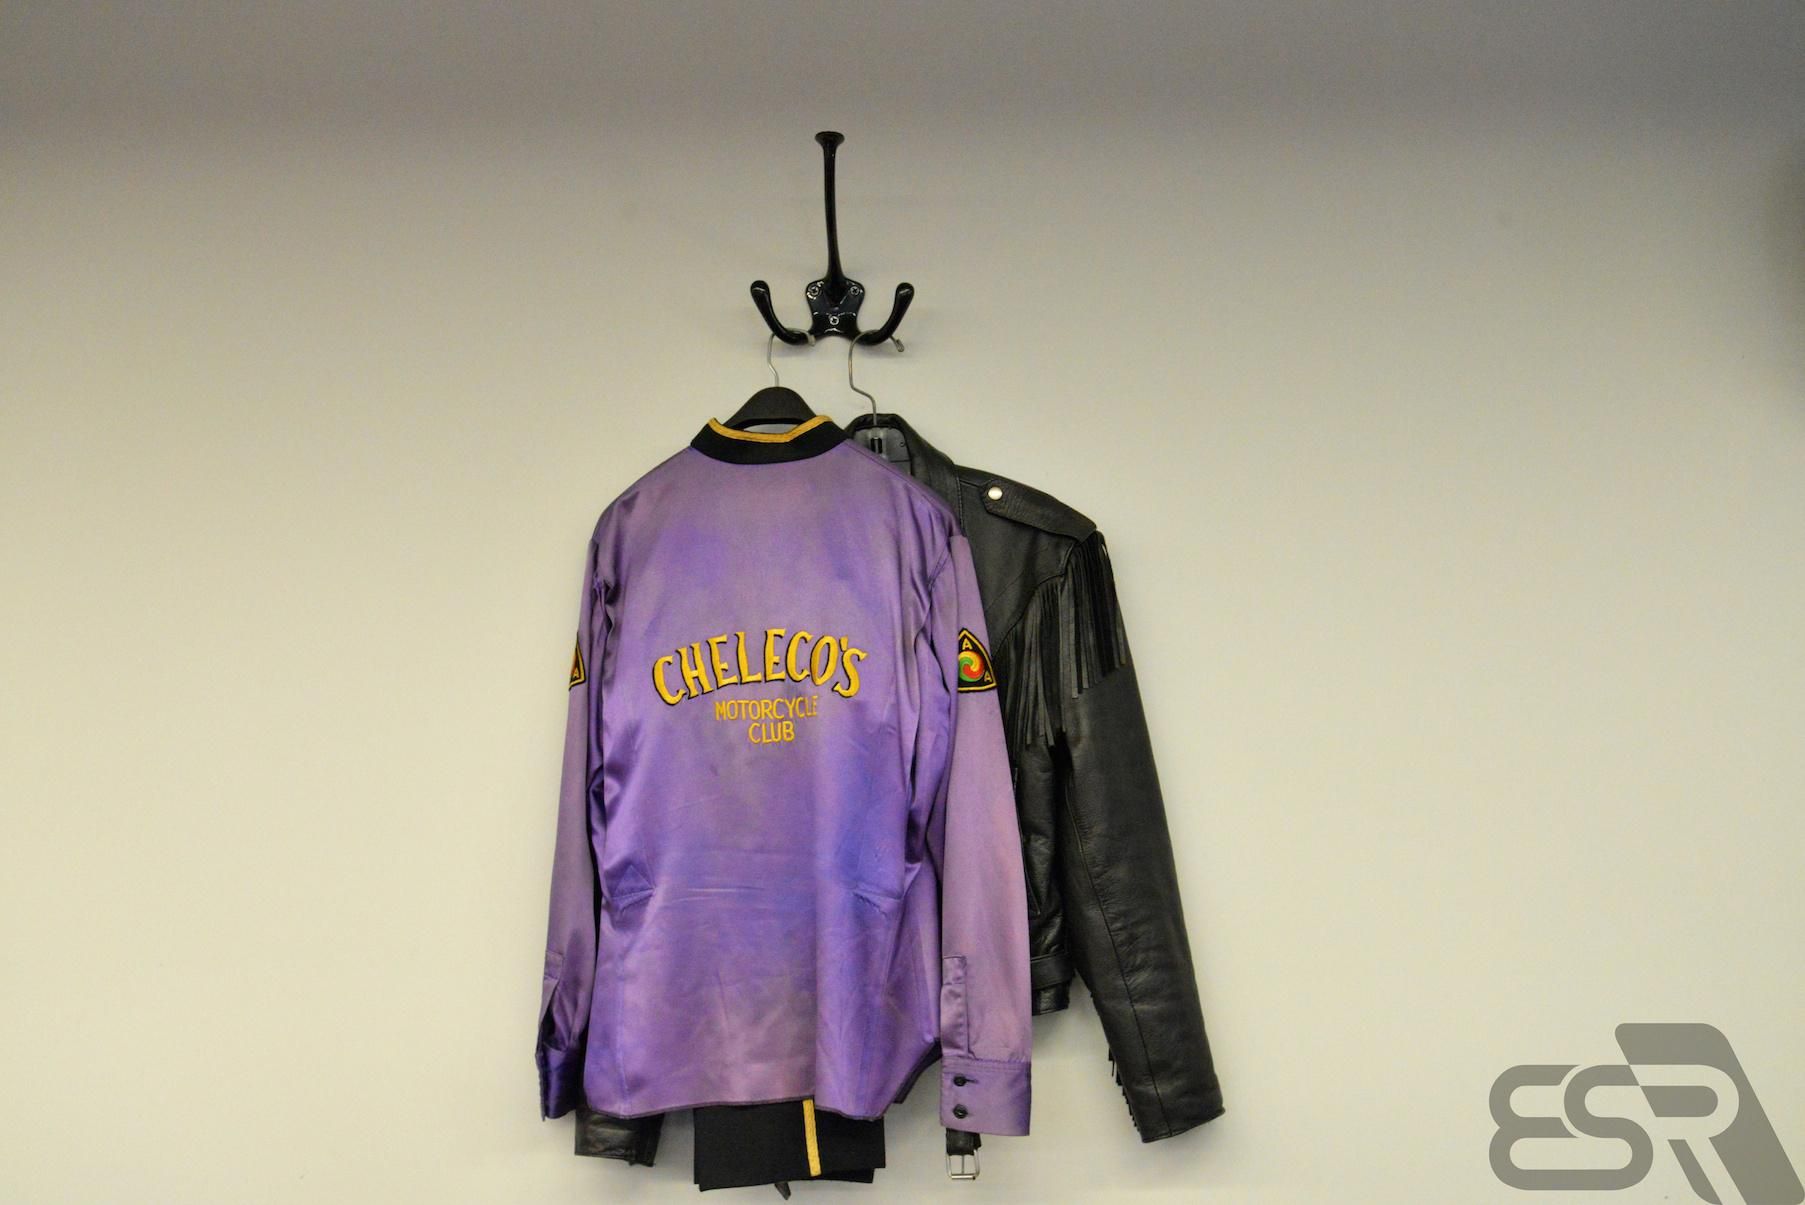 Bar Hodgson's original jacket from the Cheleco's Motorcycle Club he started in 1958